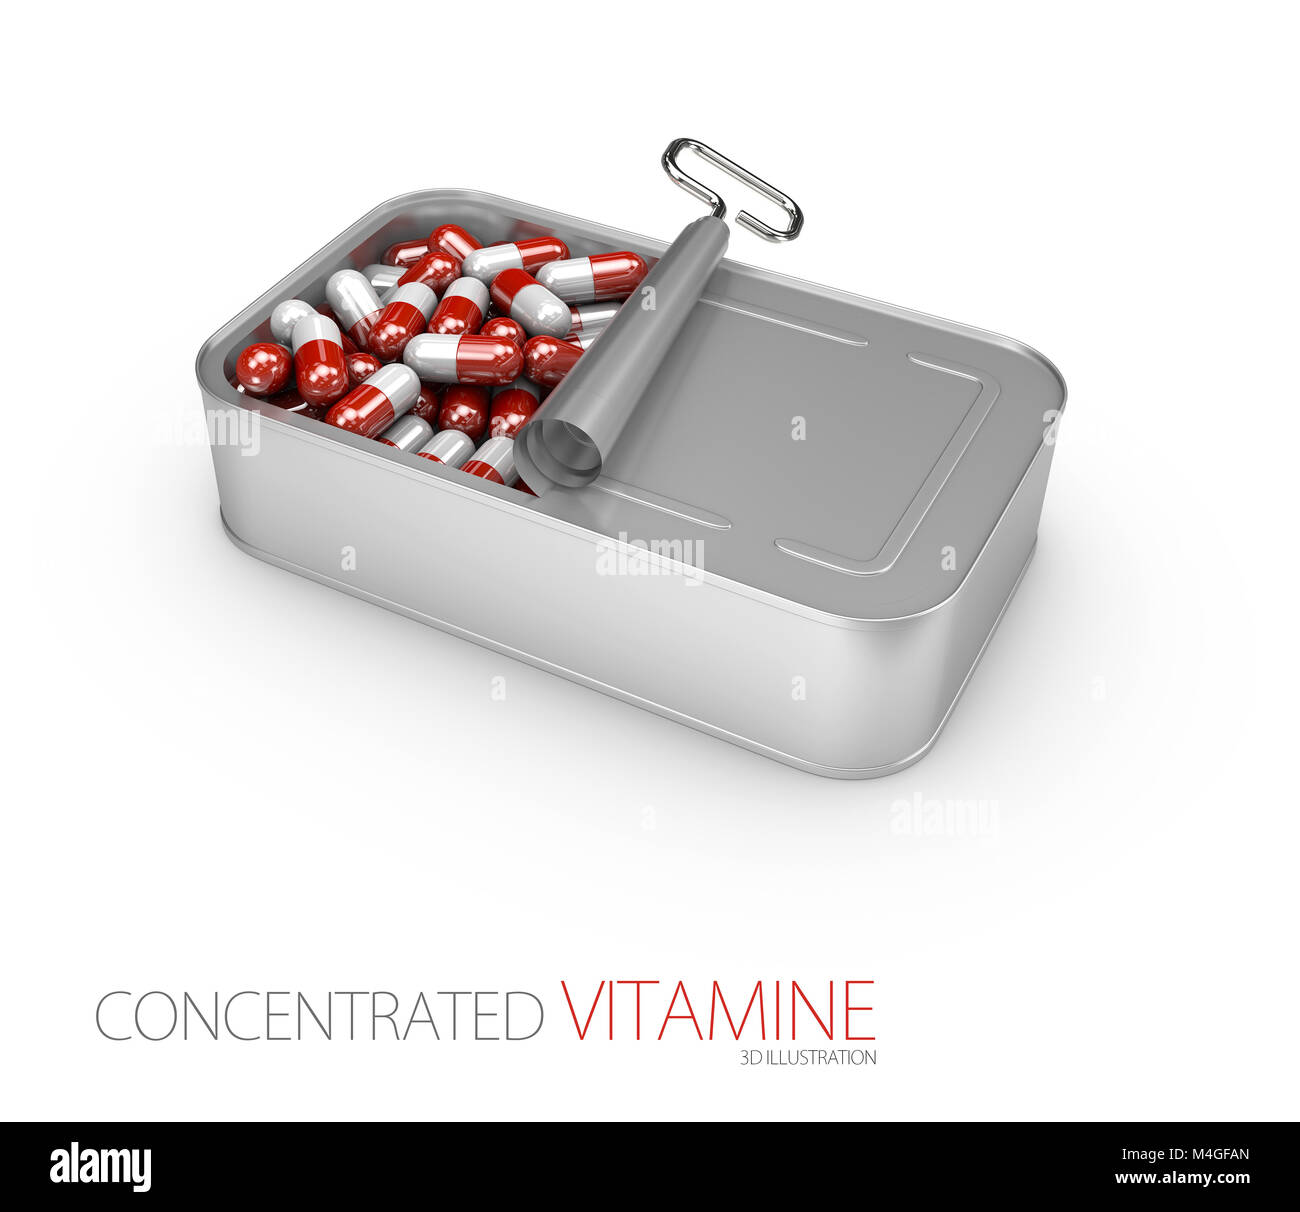 3d Illustration of vitamins, red pills in the tincan. Stock Photo